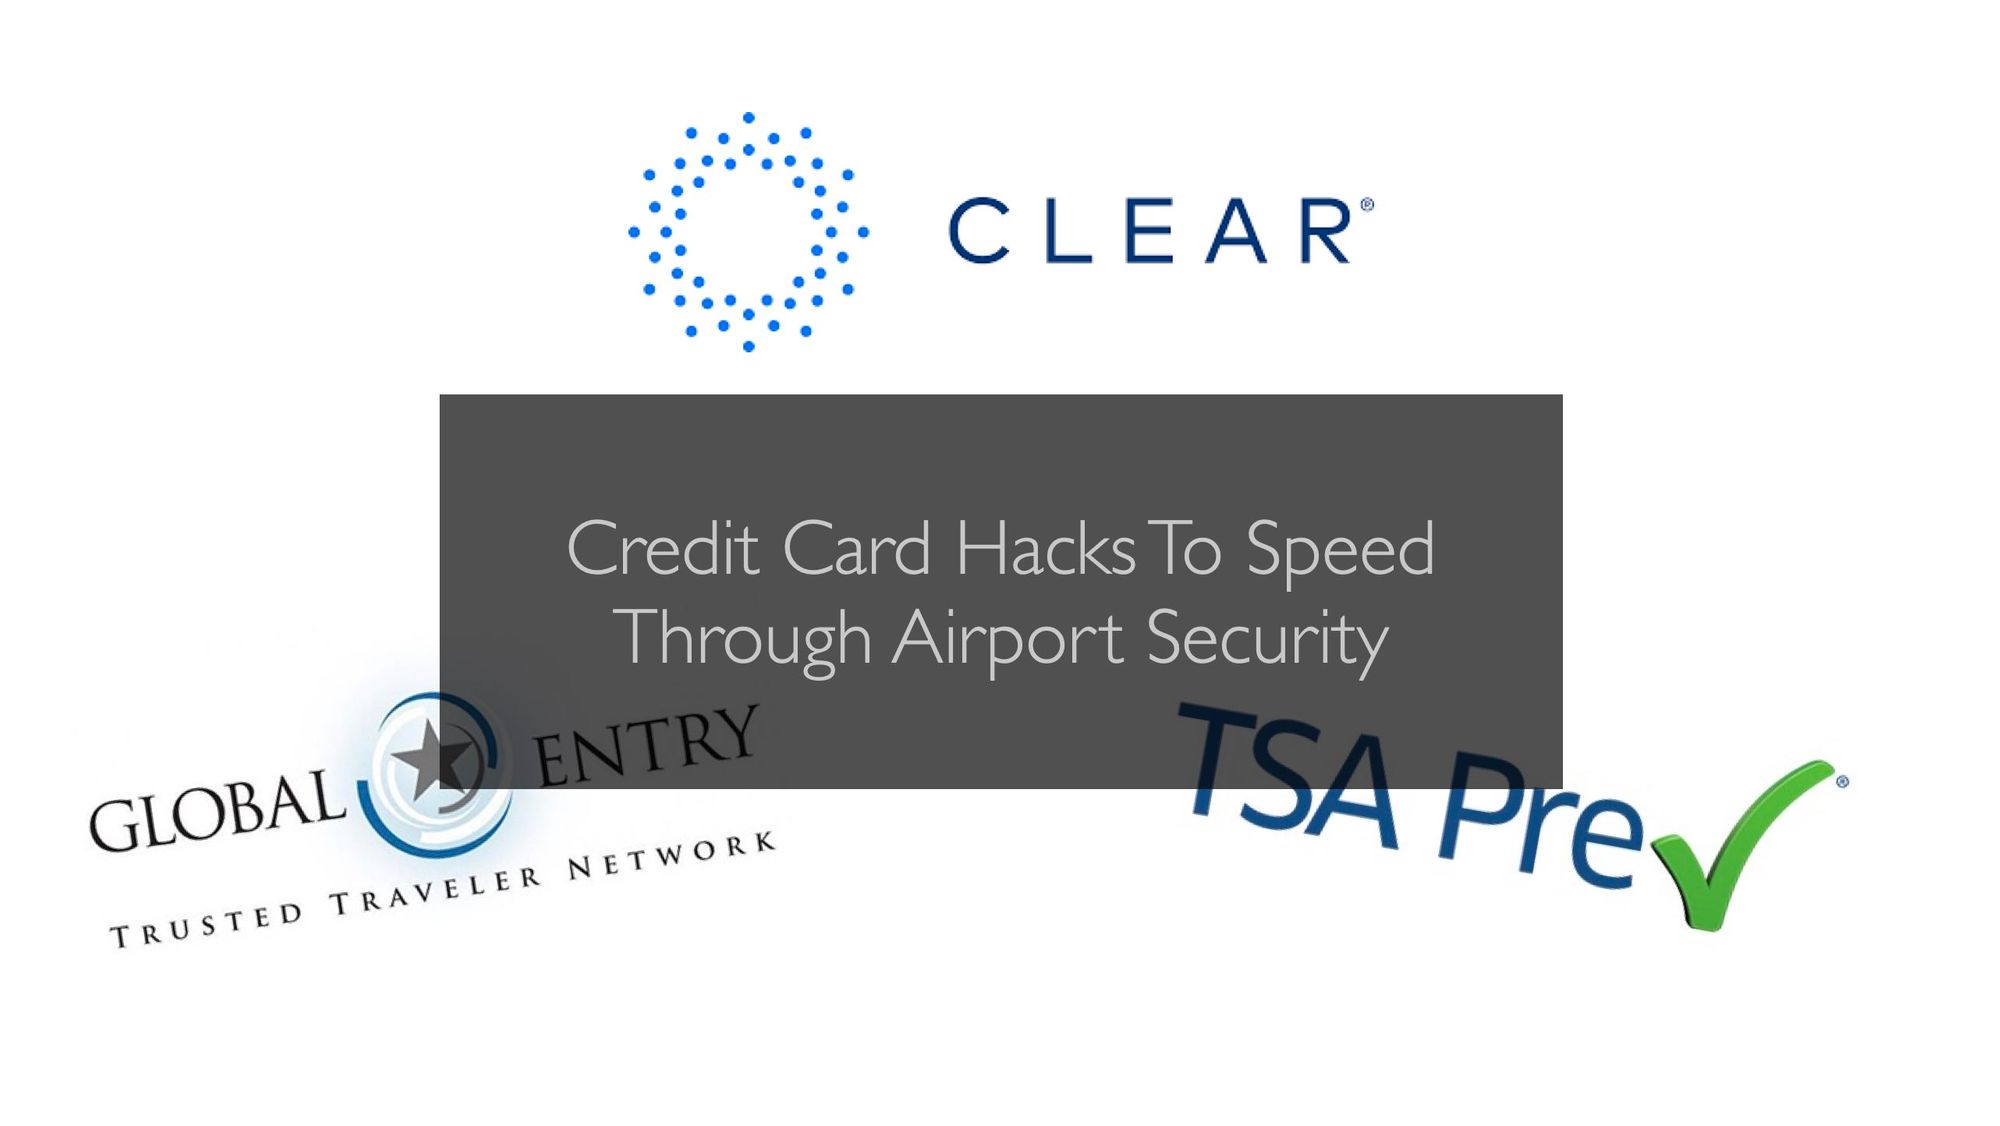 Credit Card Hacks To Speed Through Airport Security (TSA Pre, Global Entry, CLEAR)